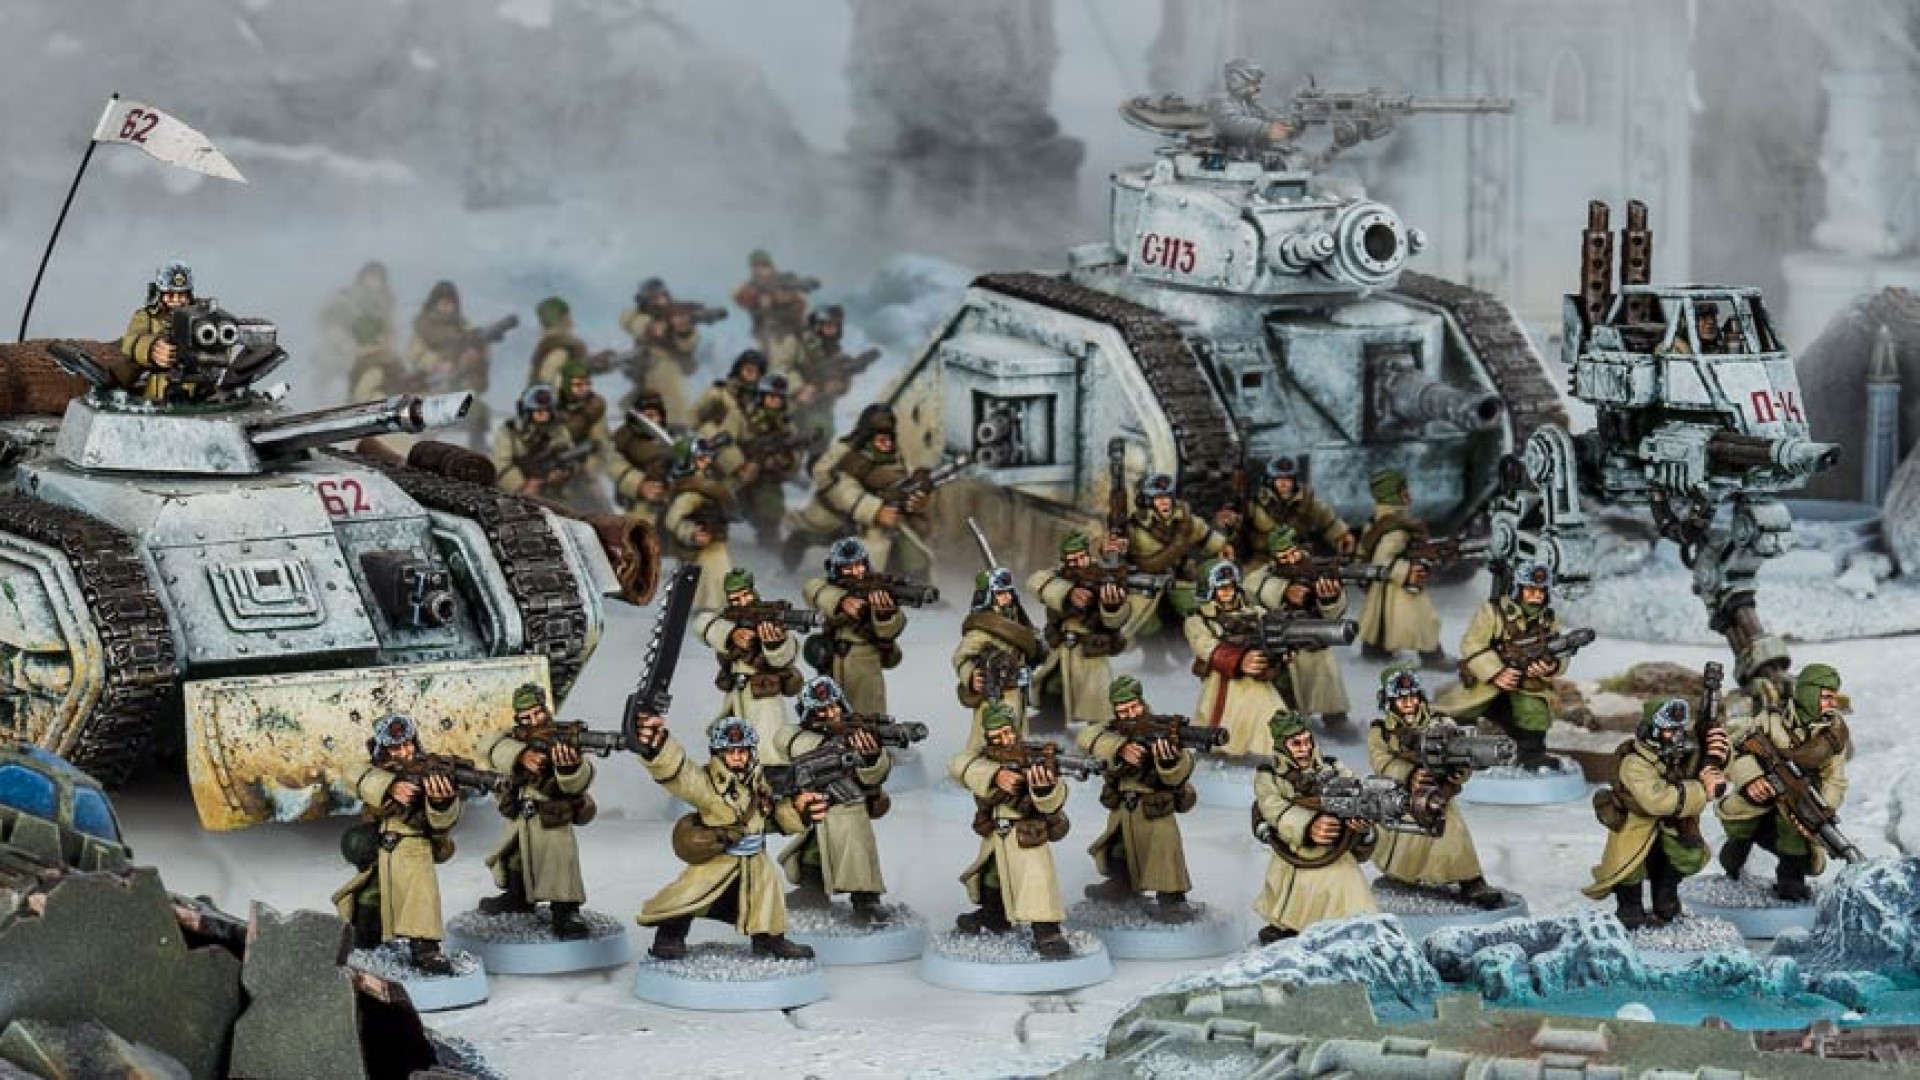 Warhammer 40K Astra Militarum New Models Review - Fight the Good Fight